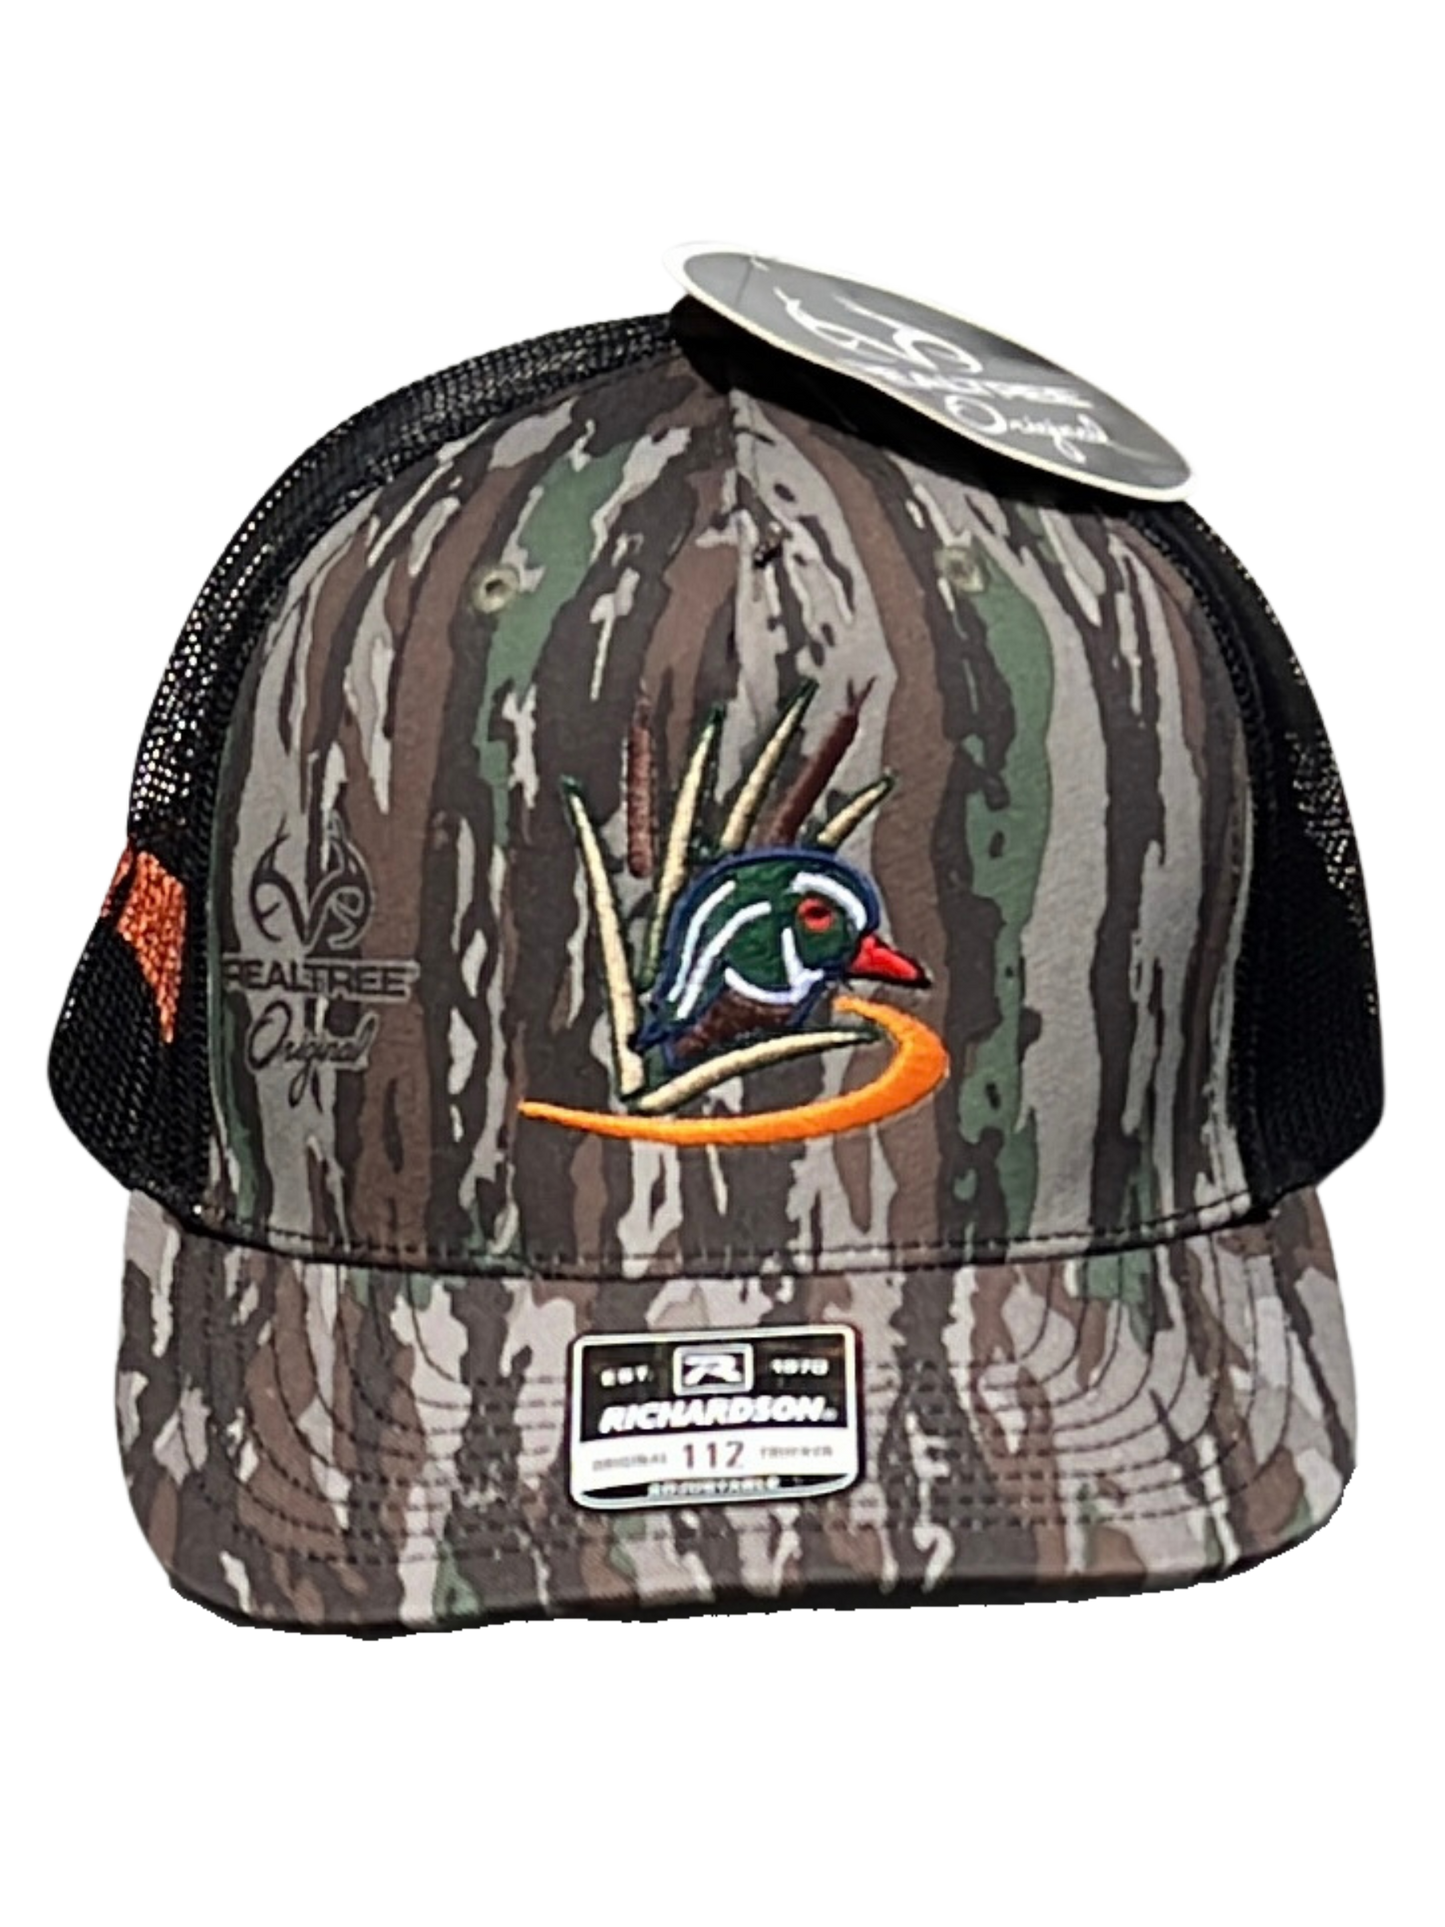 Realtree embroidered duck hat